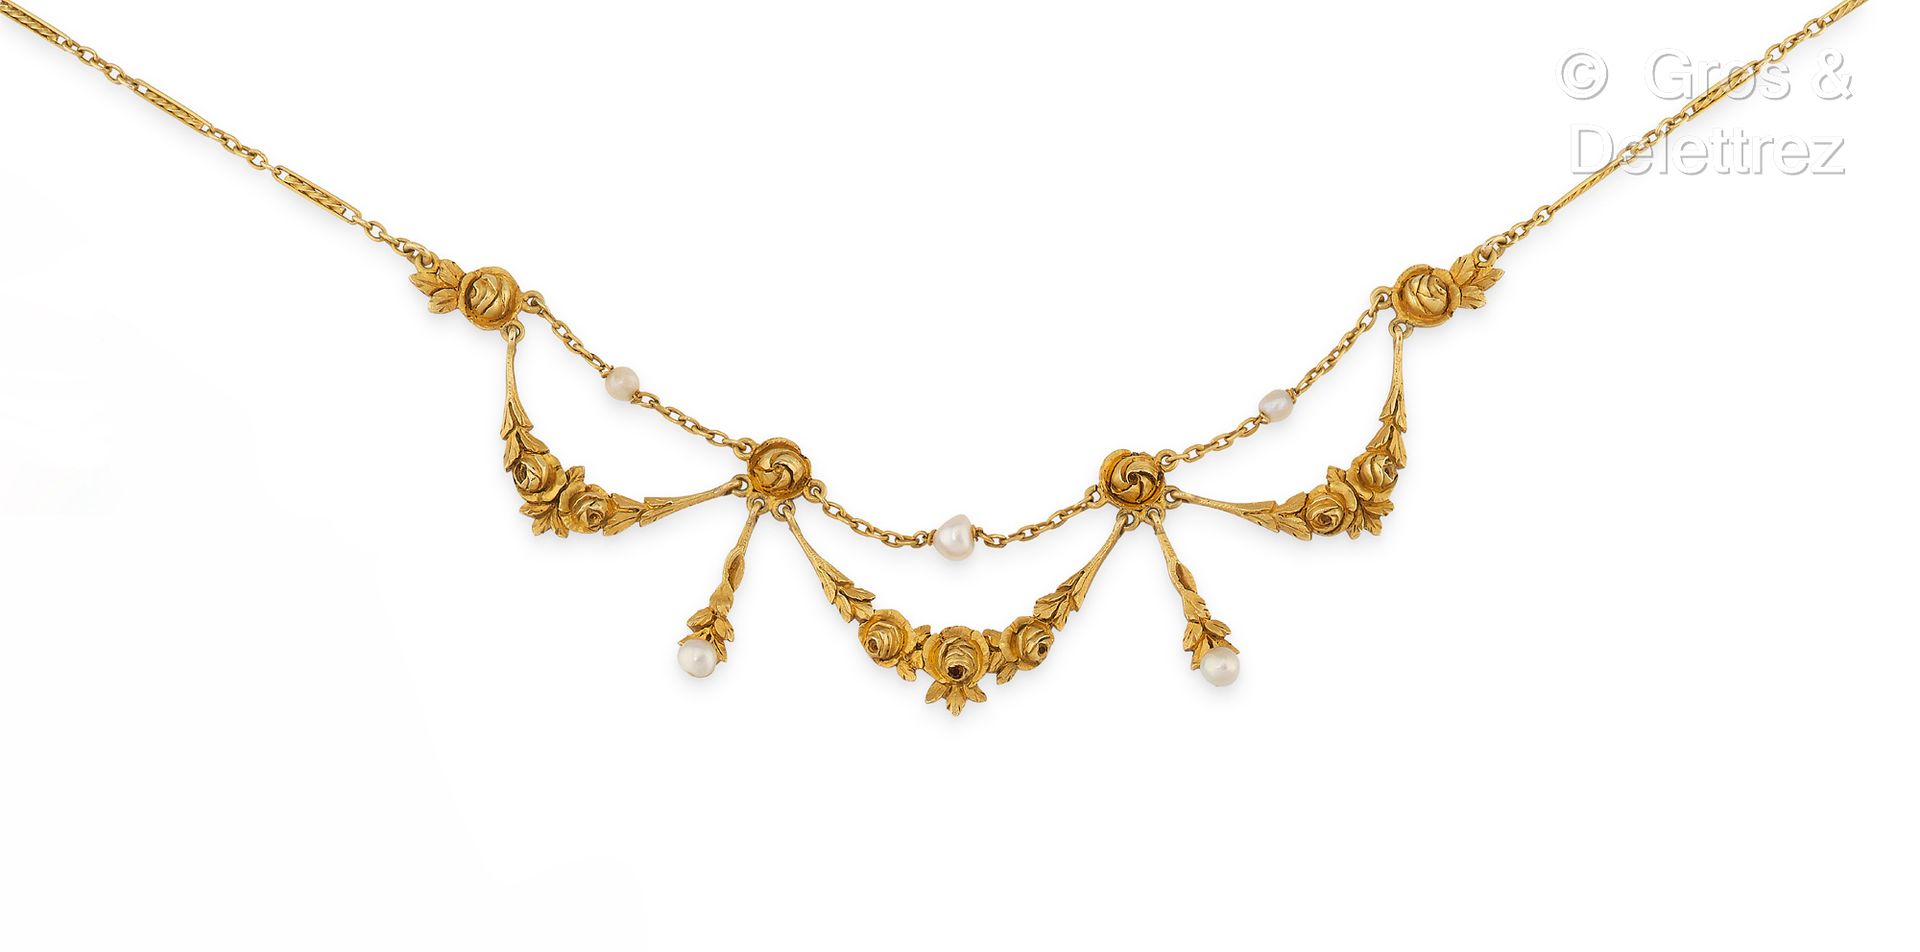 Null Necklace "Drapery" in yellow gold, carved roses alternated with pearls prob&hellip;